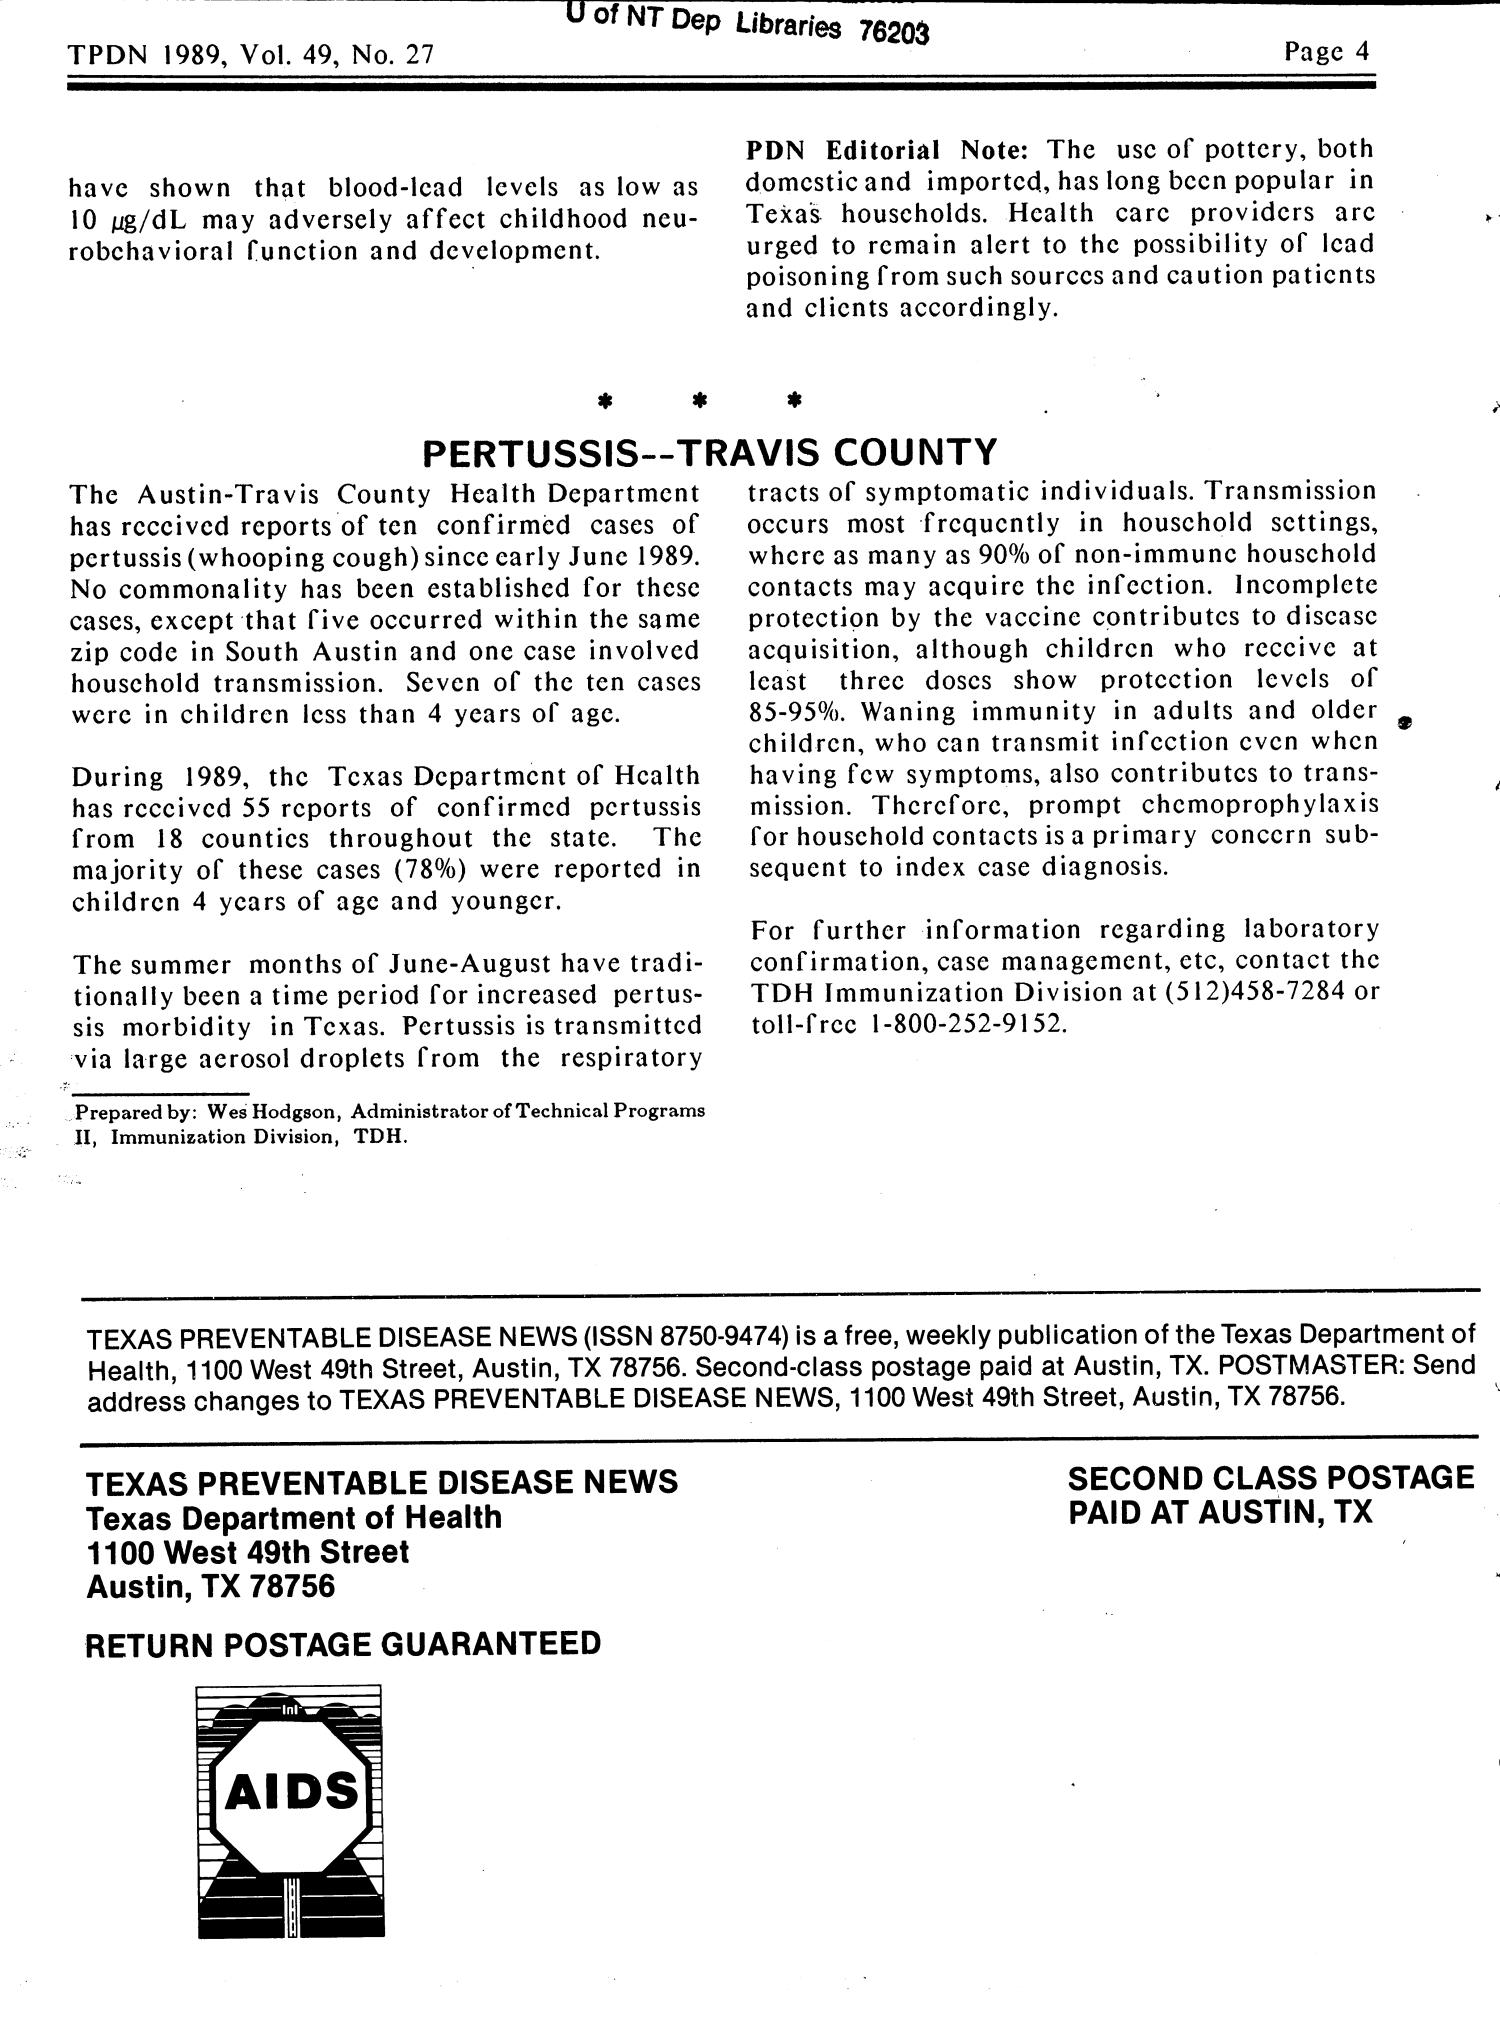 Texas Preventable Disease News, Volume 49, Number 27, July 8, 1989
                                                
                                                    BACK COVER
                                                